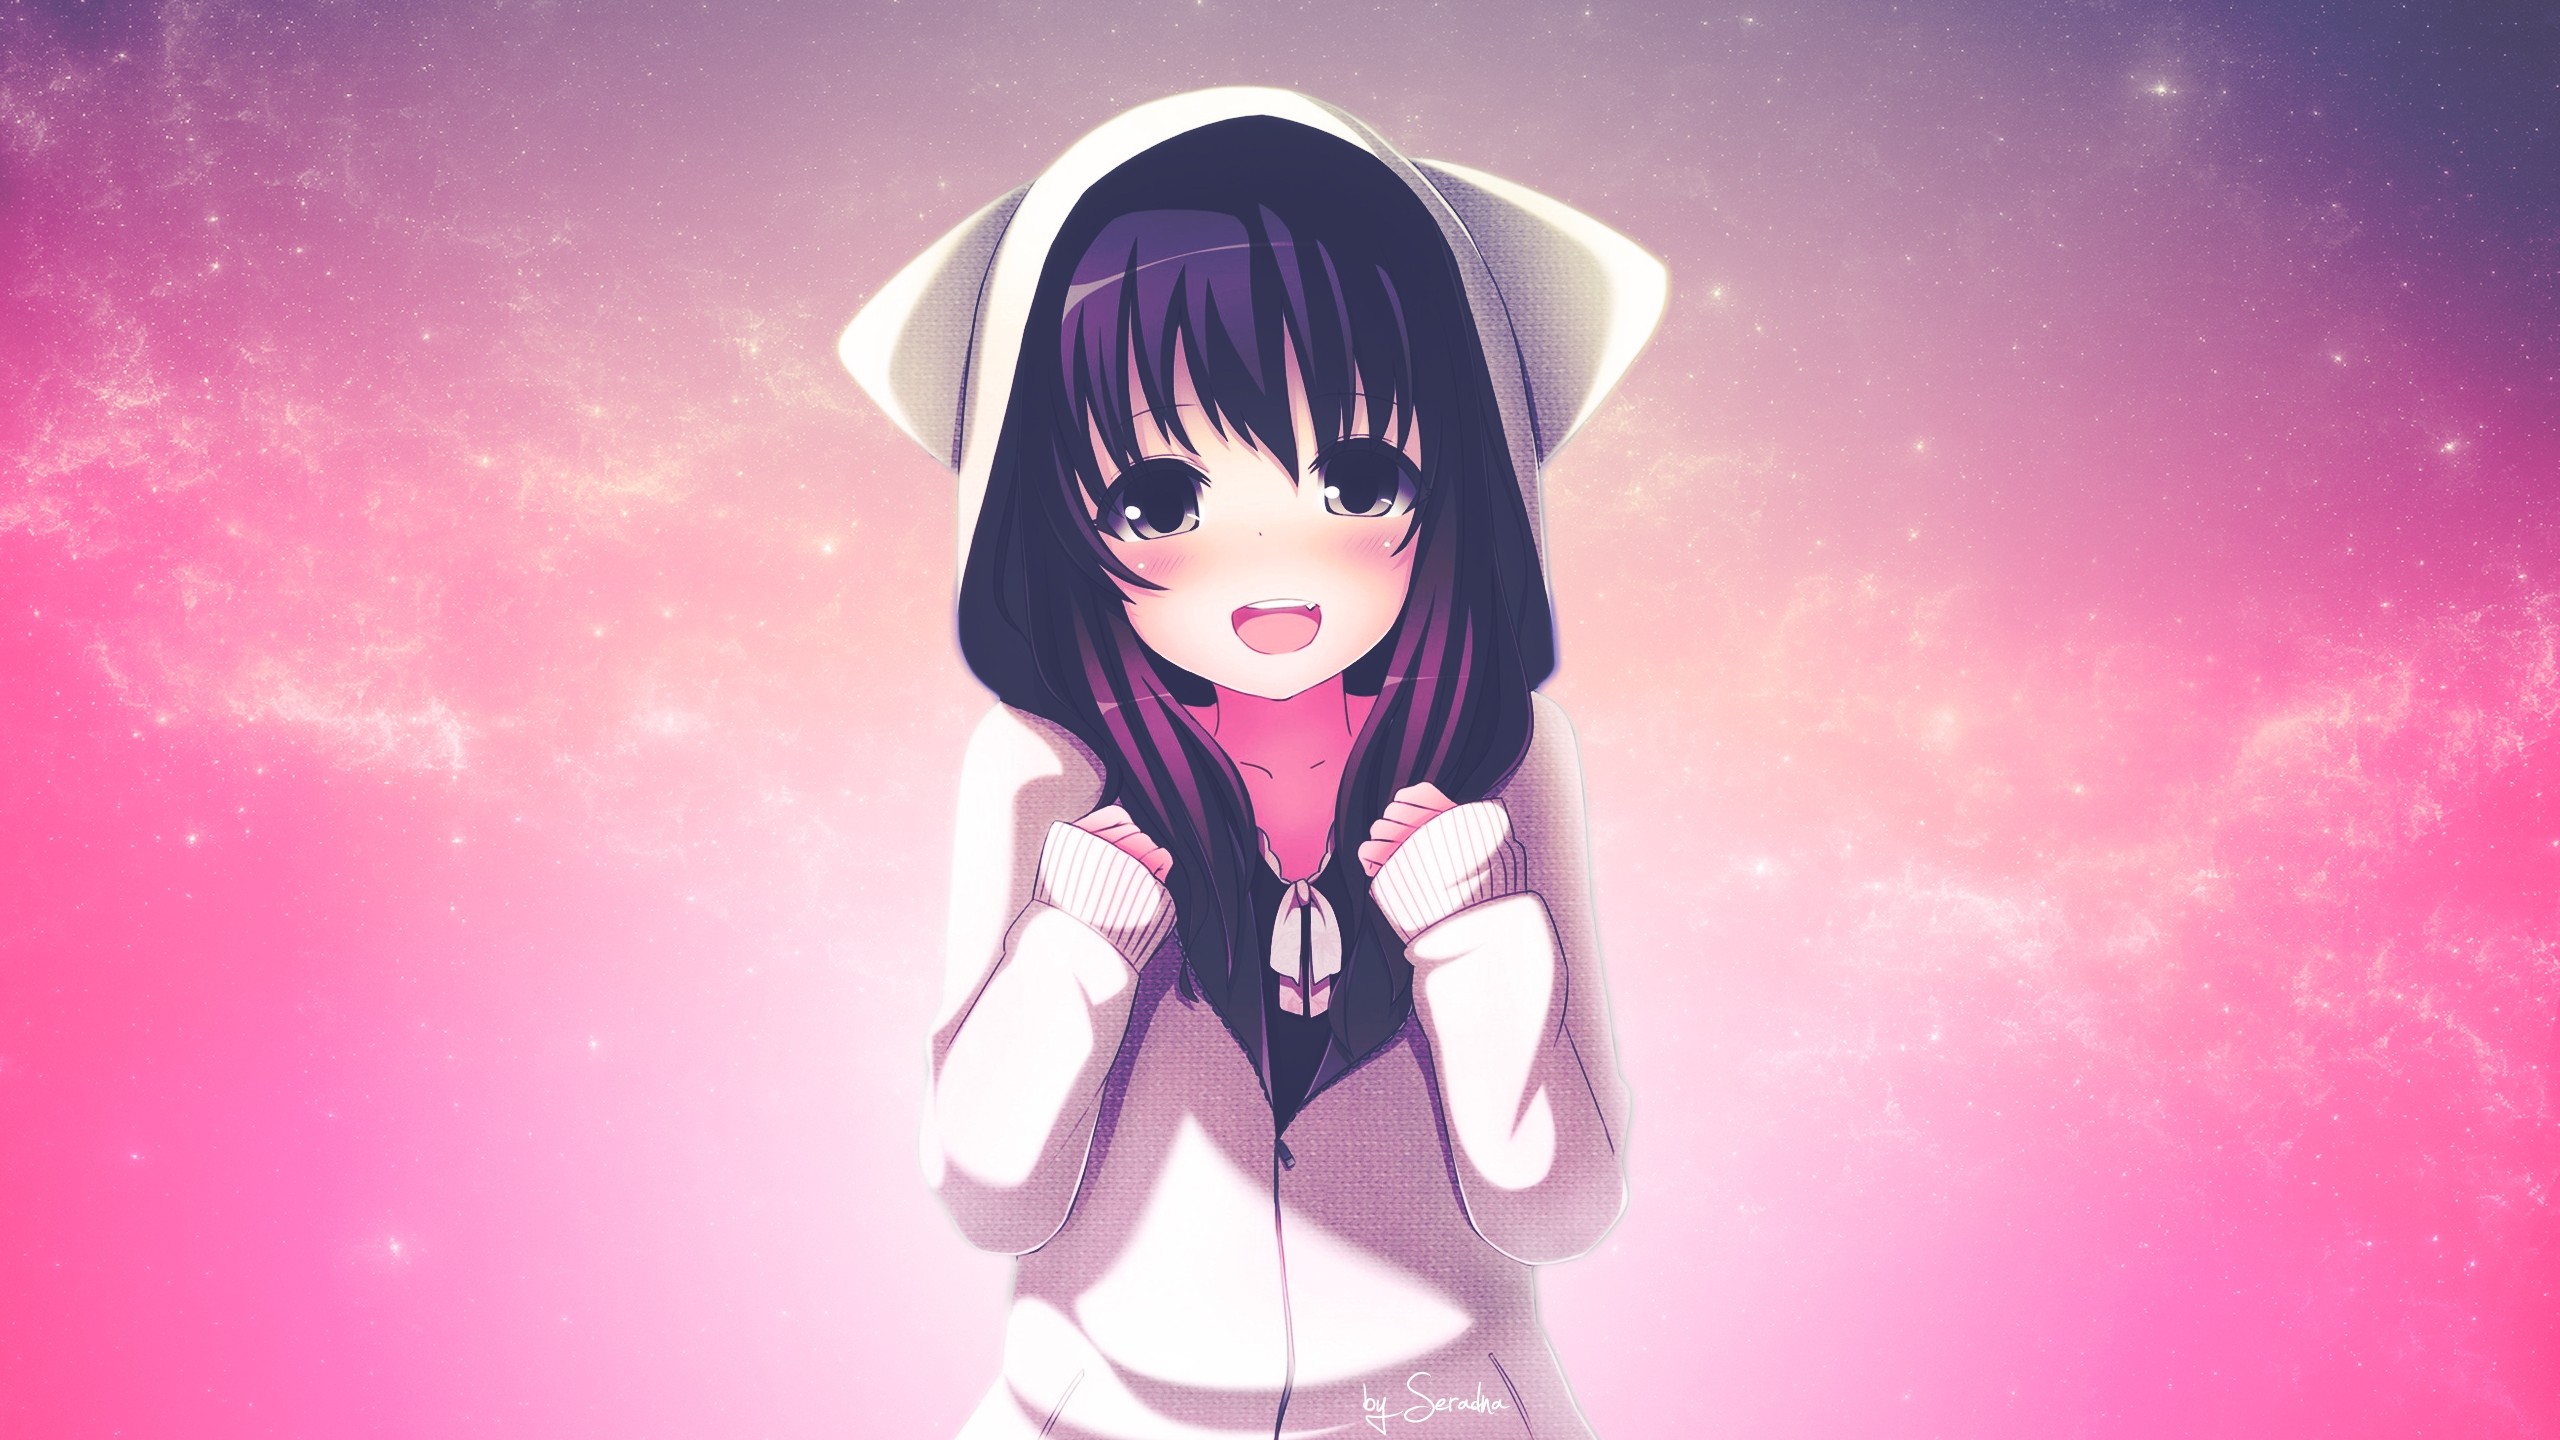 Cute Anime wallpaper ·① Download free awesome full HD ...